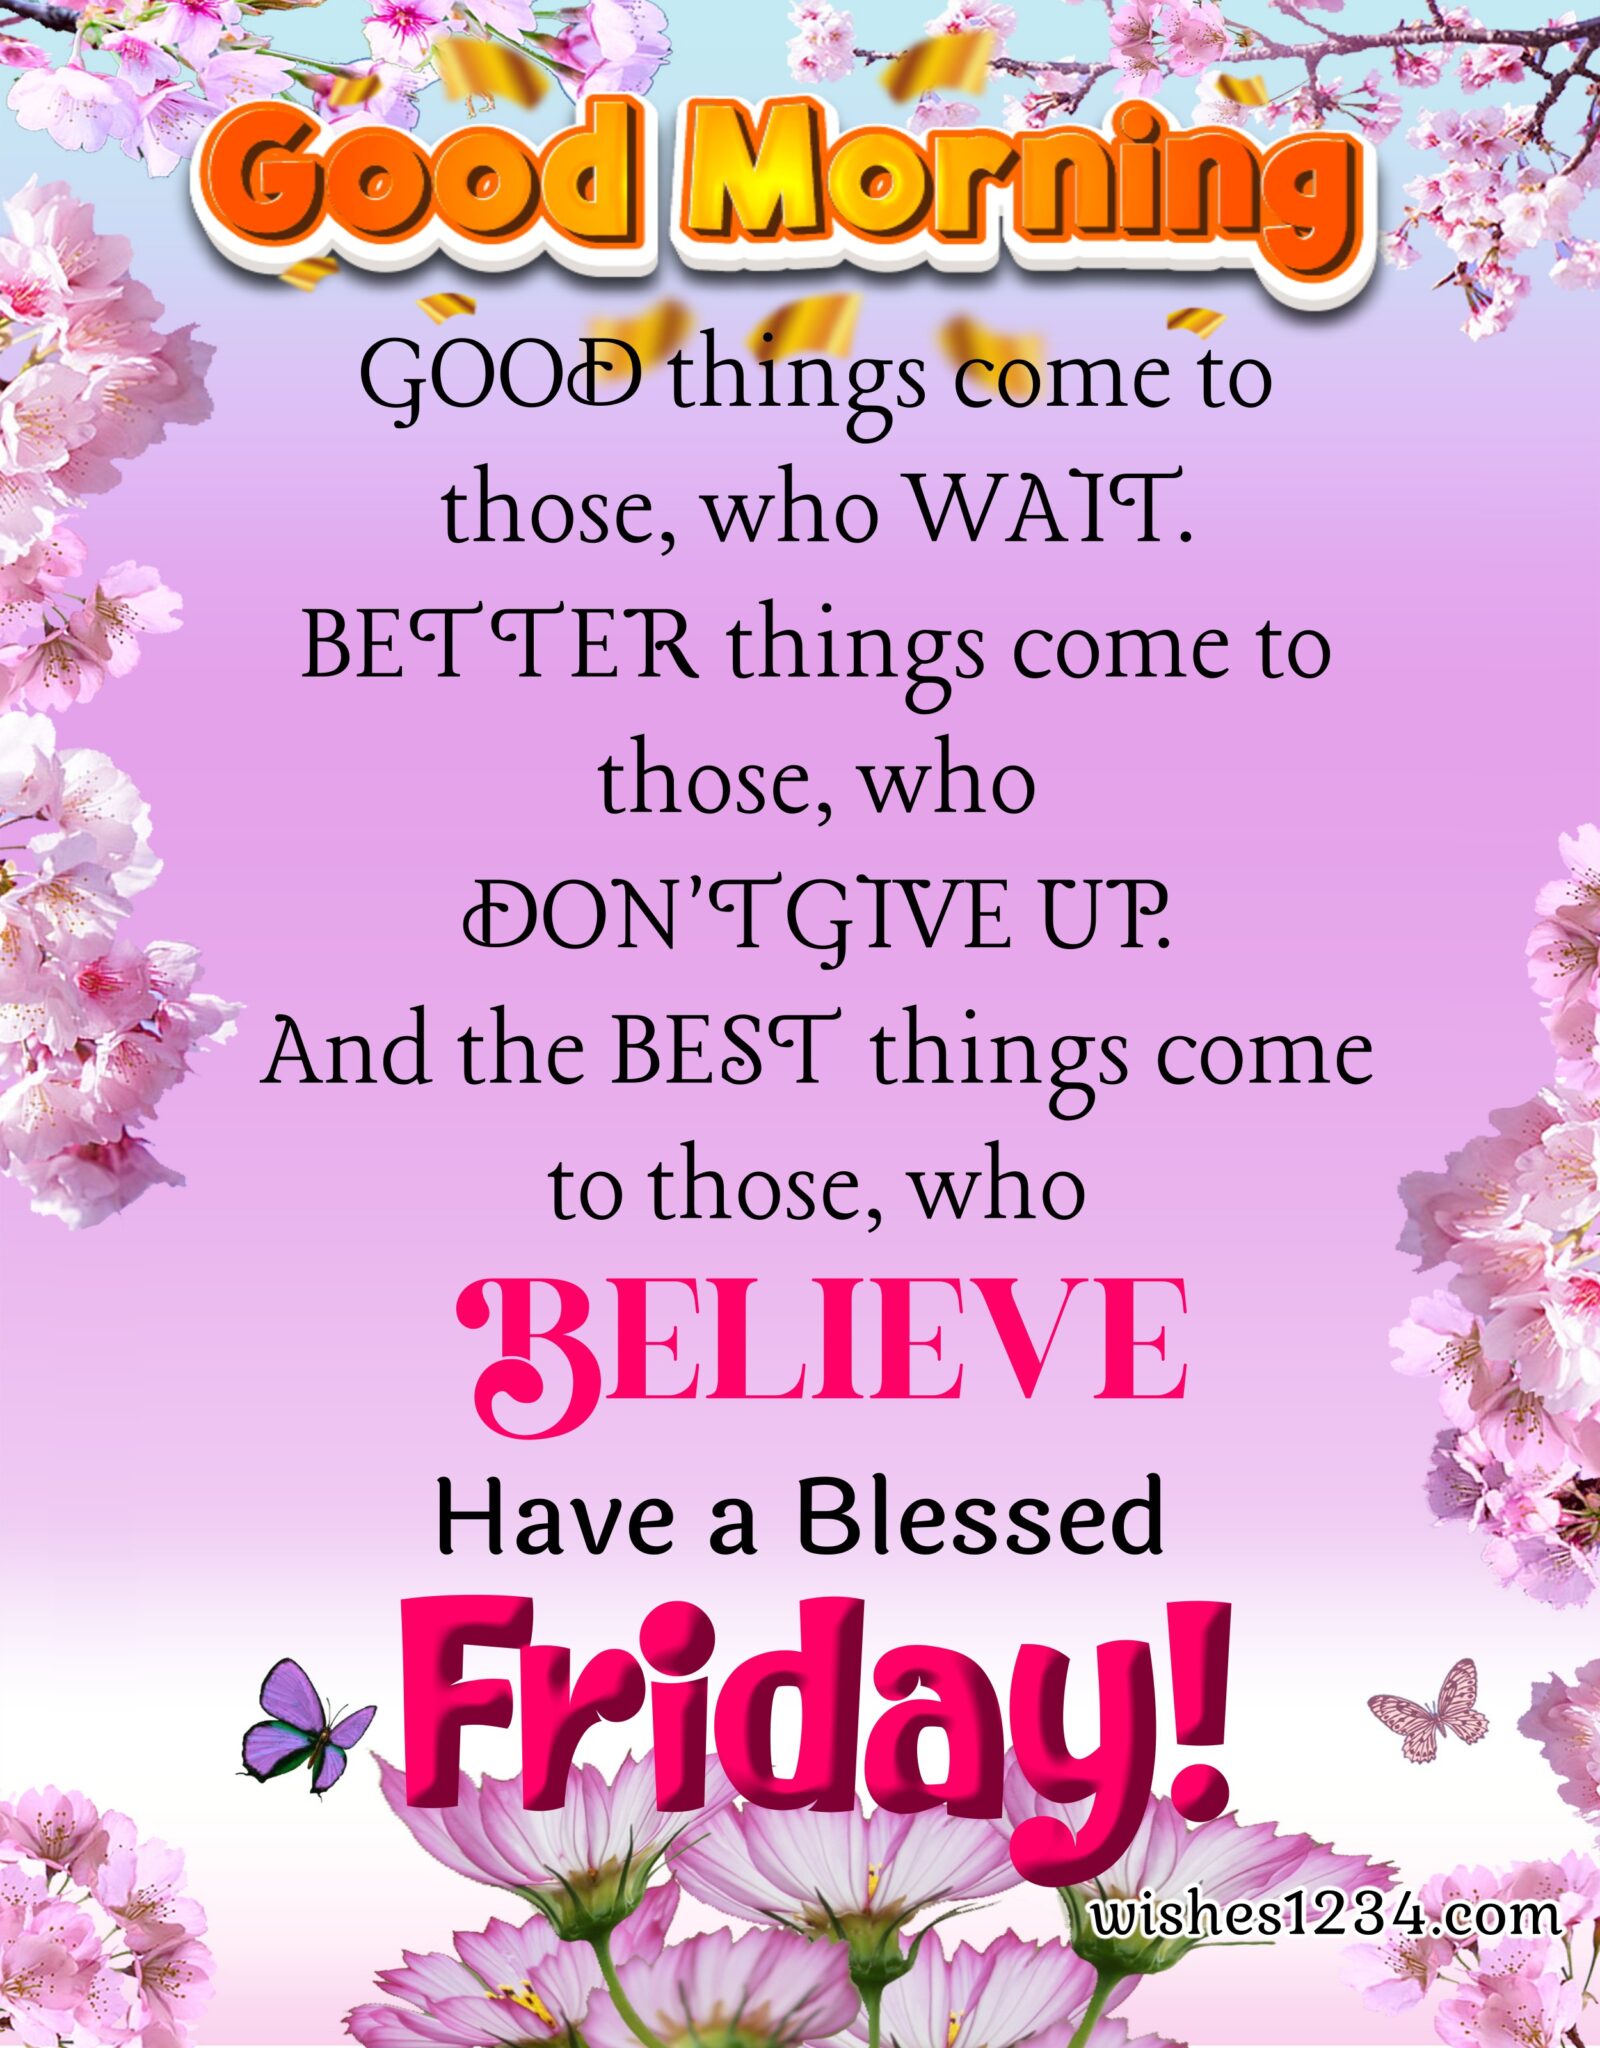 Quotes on Friday - wishes1234